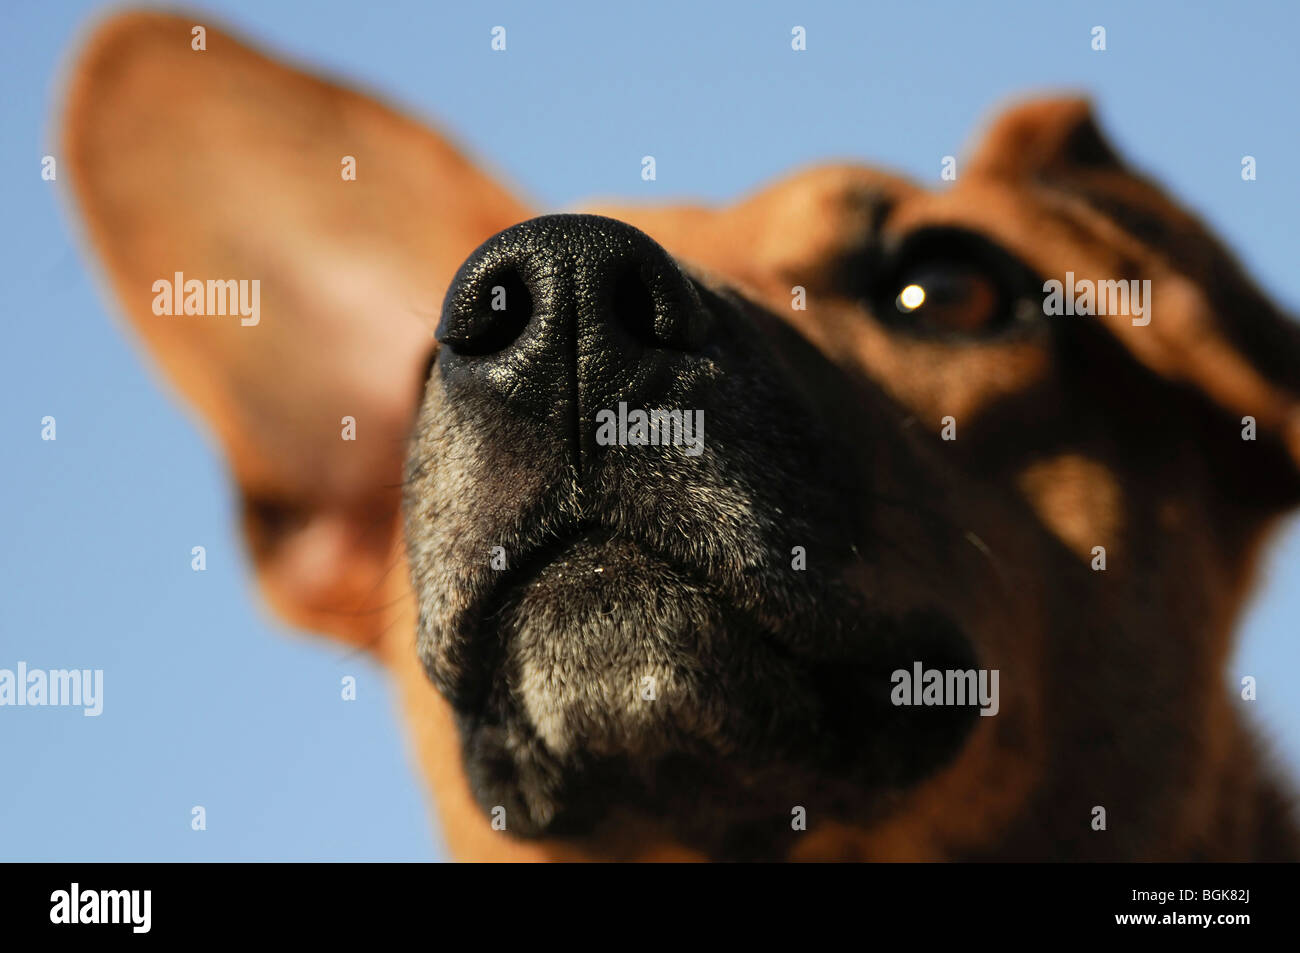 A close-up view of a dog Stock Photo